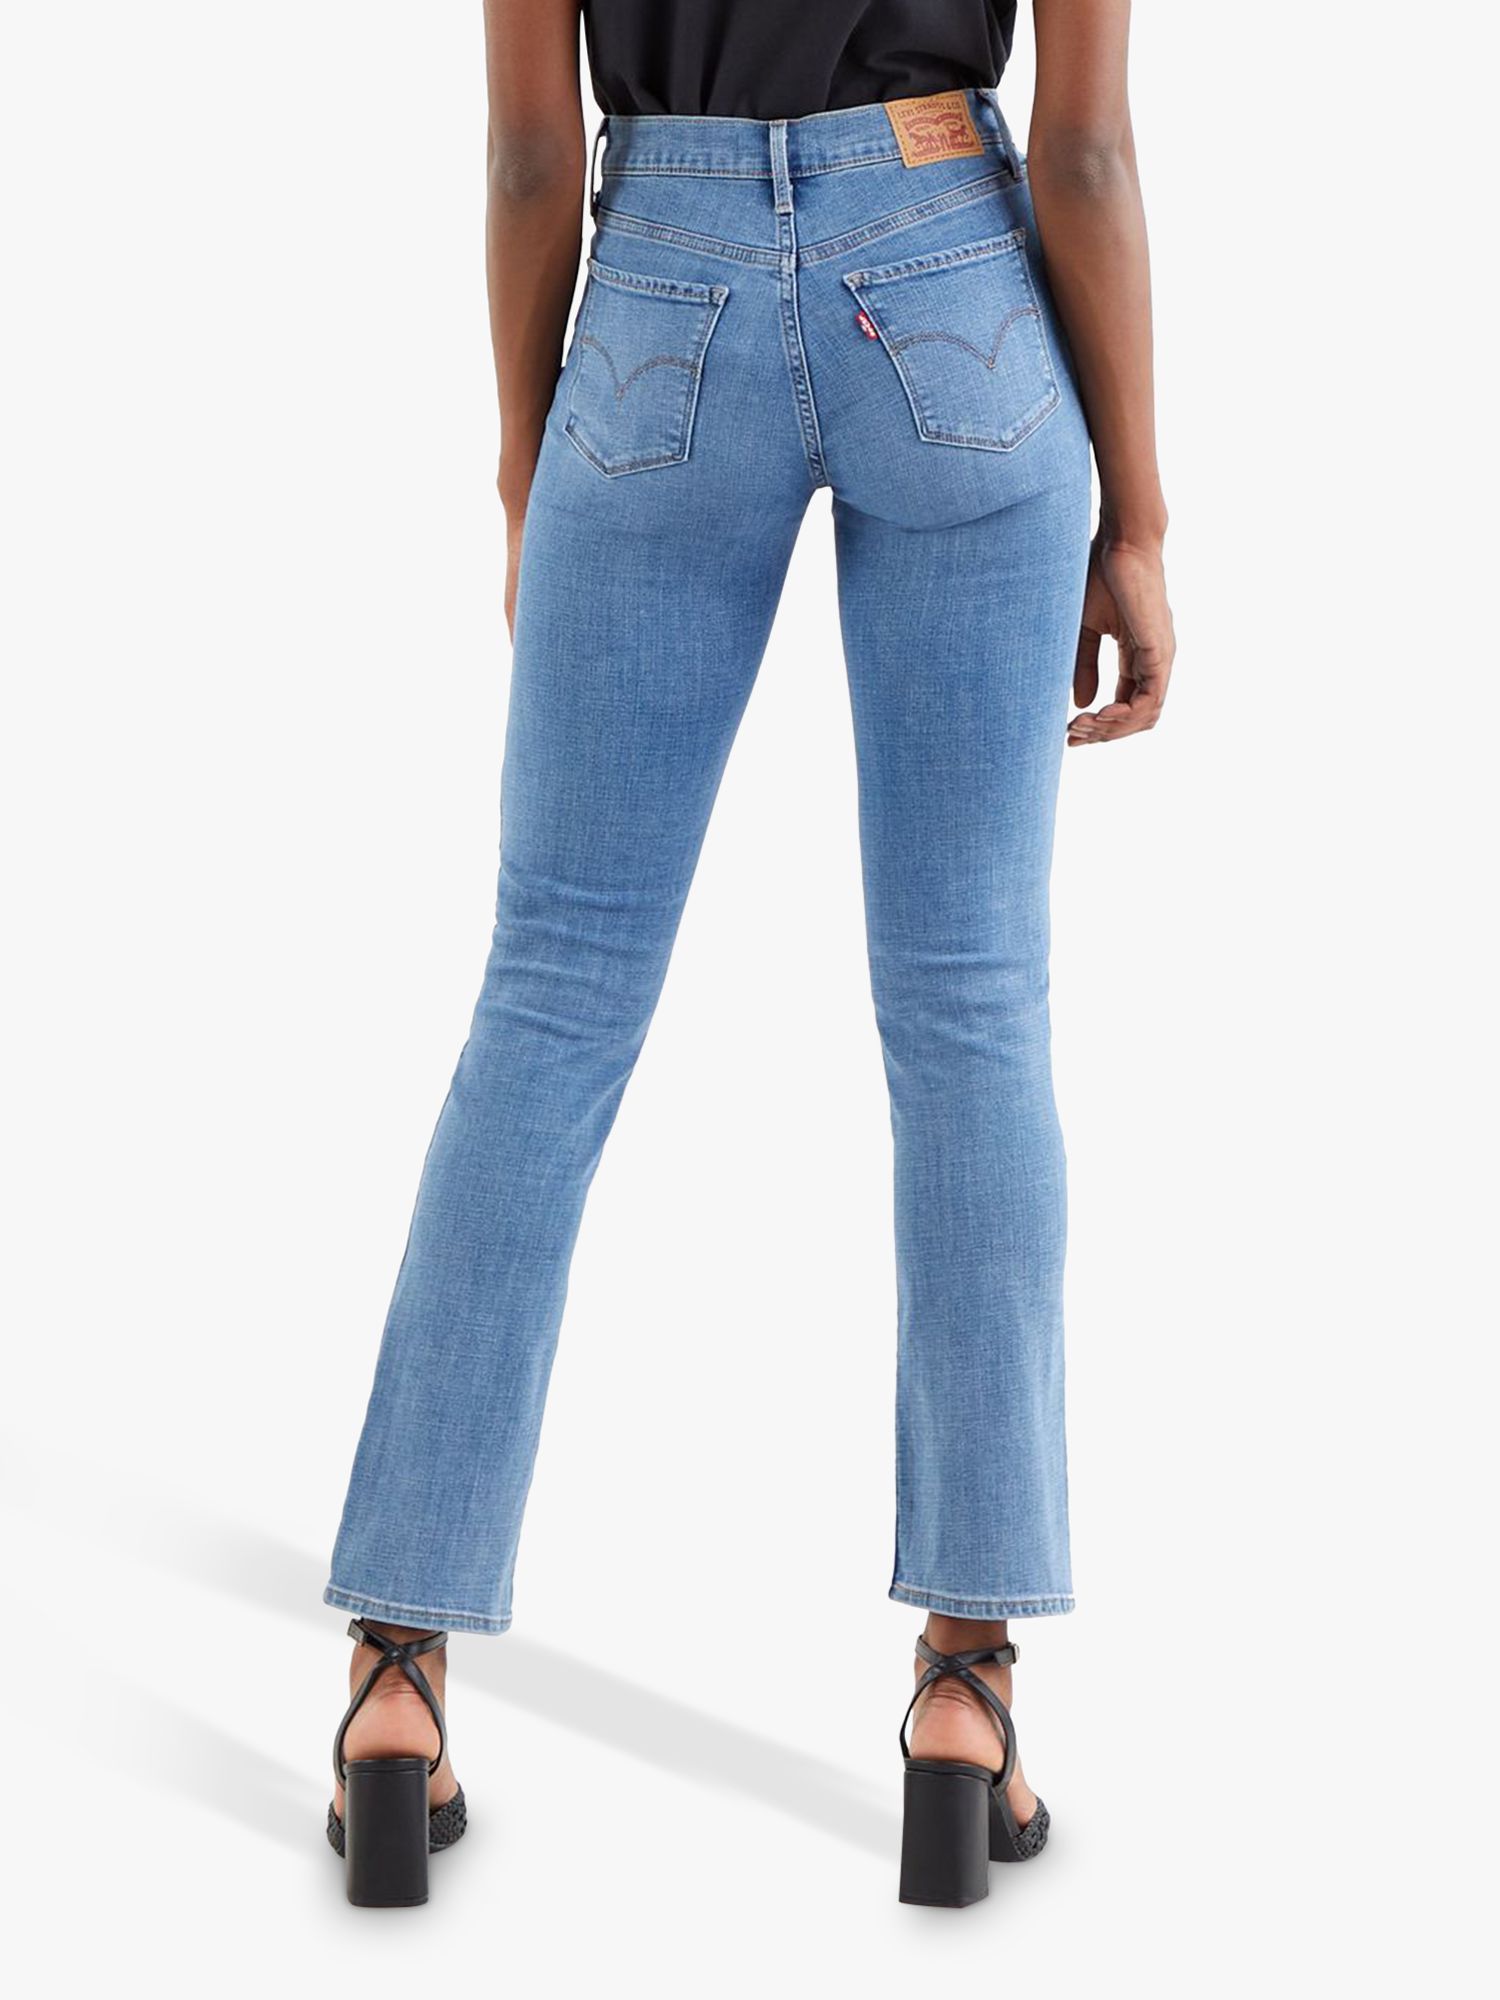 Levi's 314 Shaping Straight Cut Jeans, Slate Mystery at John Lewis ...